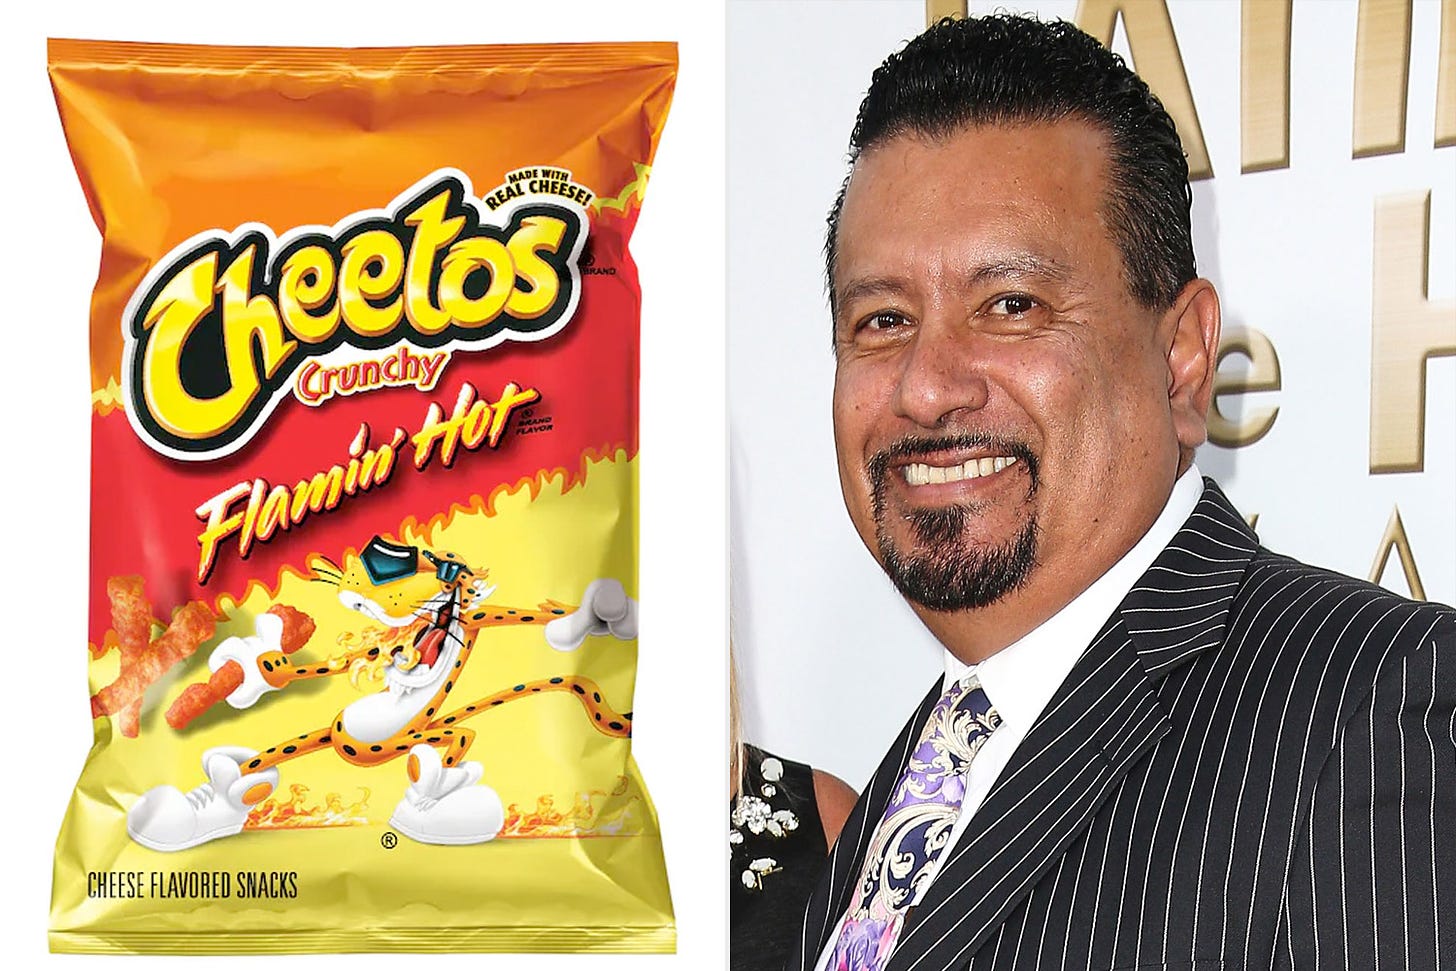 Man Who Claims He Invented Hot Cheetos Responds to Frito-Lay&#39;s Claims |  PEOPLE.com